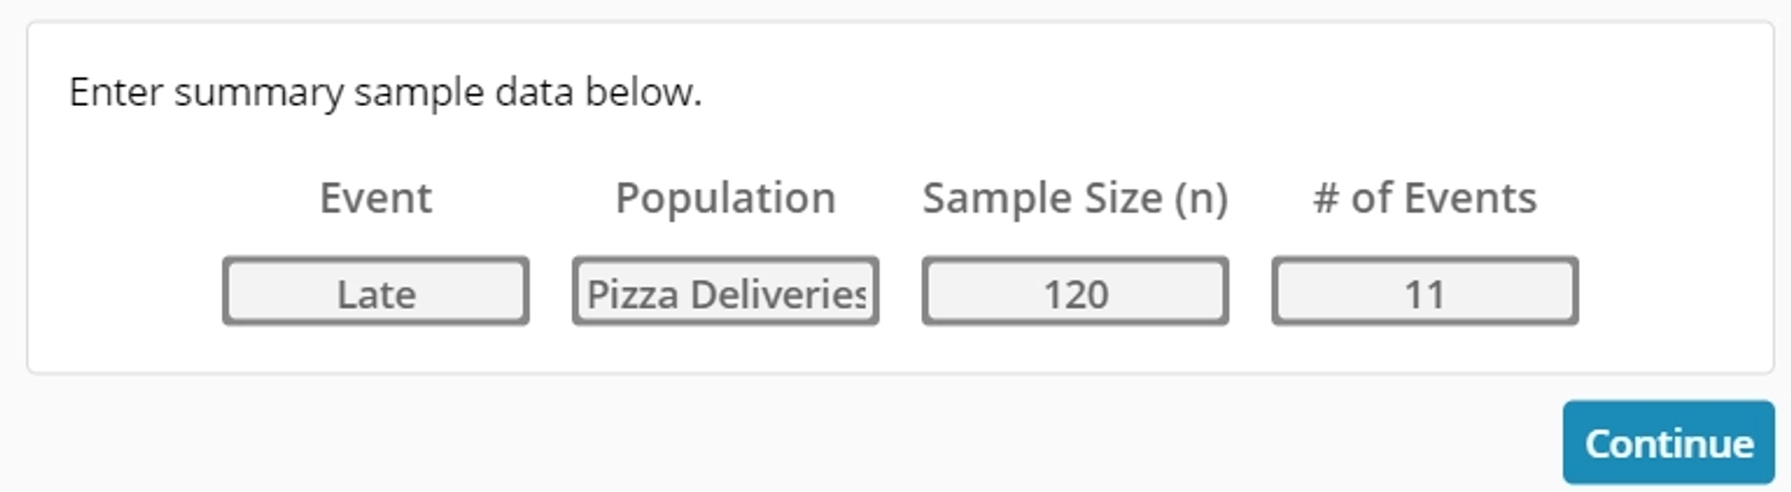 Pop up to enter summary sample data.